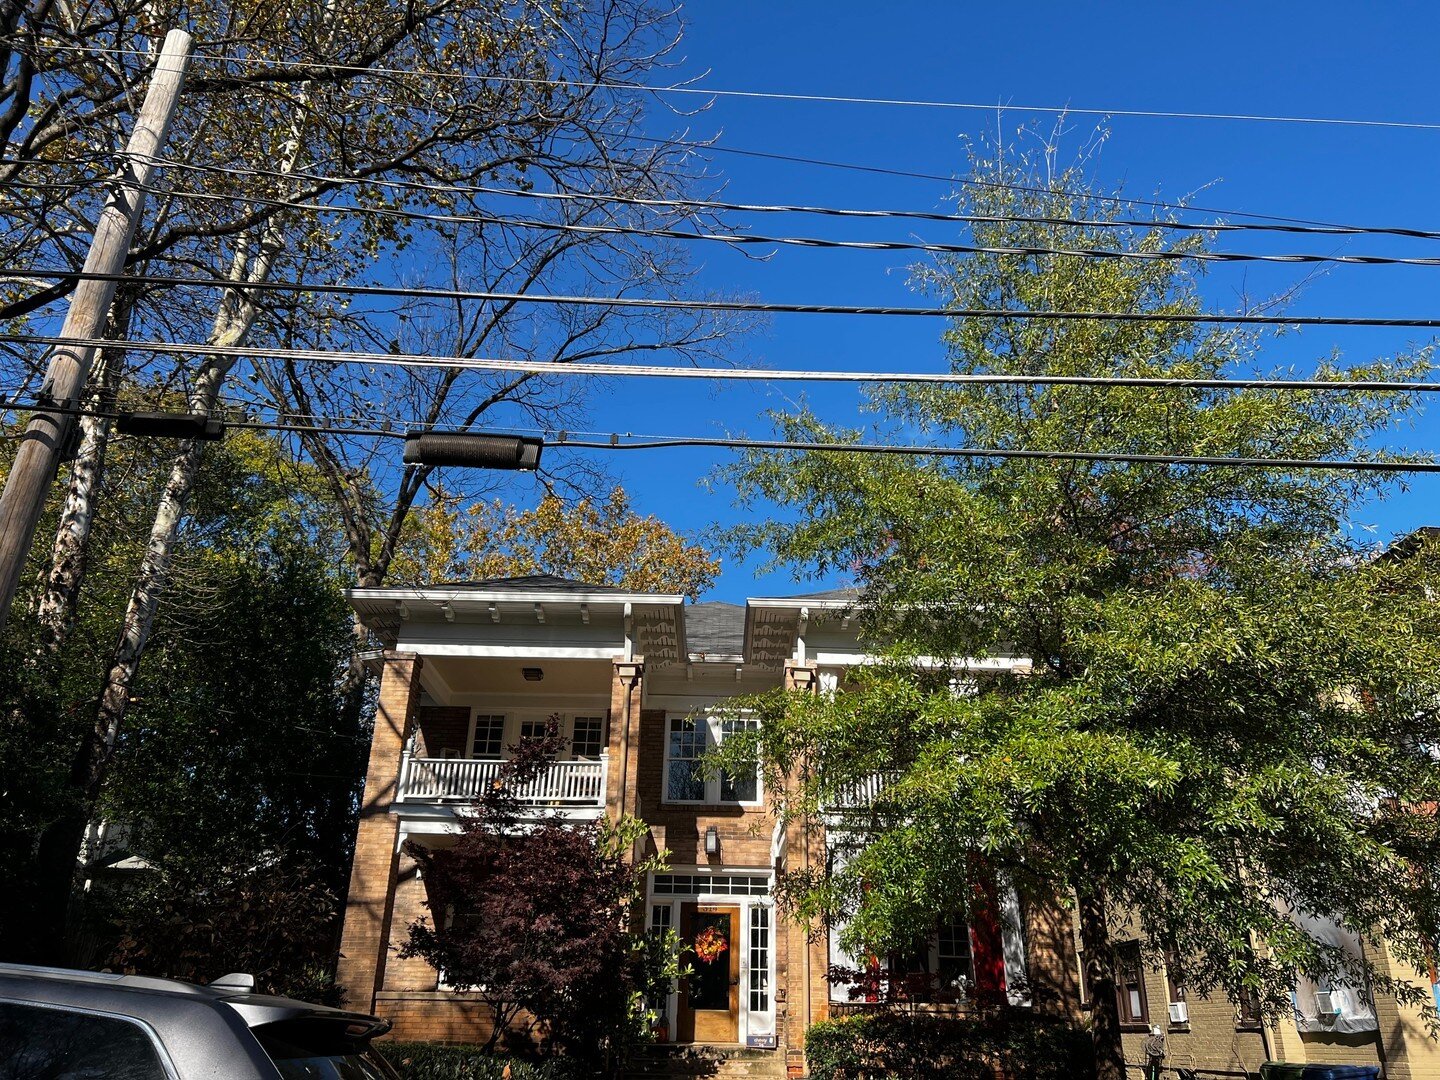 You've seen what a cottage court community can look like, but what happens when other missing middle housing types are combined? Let's take a stroll through Midtown Atlanta. In this charming neighborhood, just a stone's throw from Piedmont Park, town